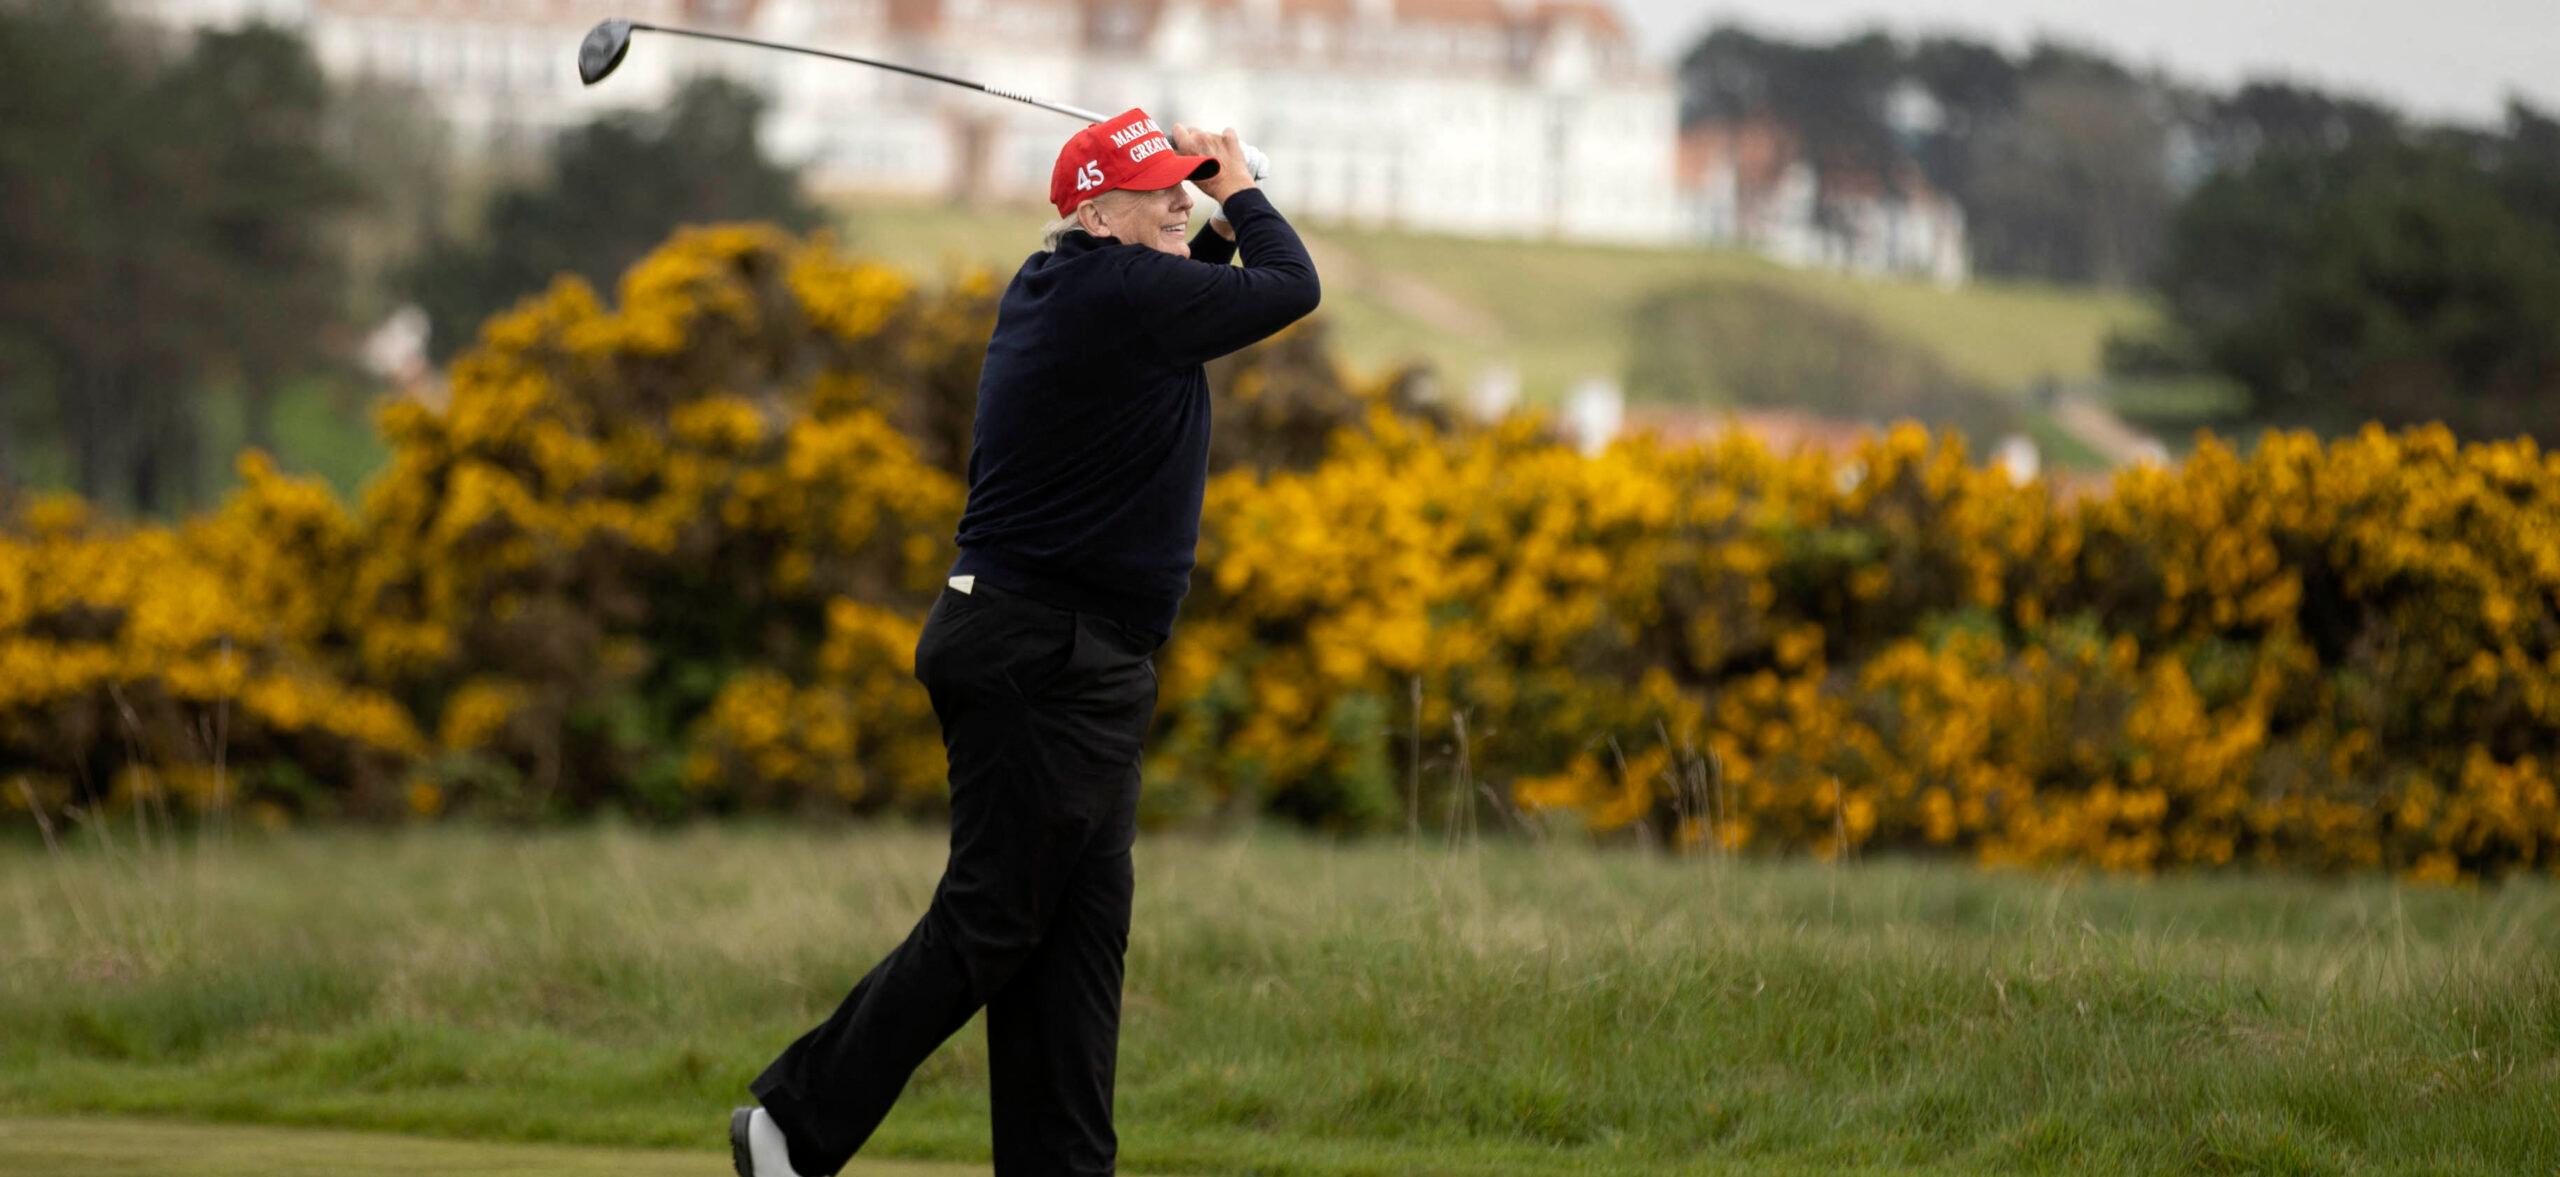 Sportswriter Explains How Donald Trump Allegedly Cheats At Golf After His Trophy Wins